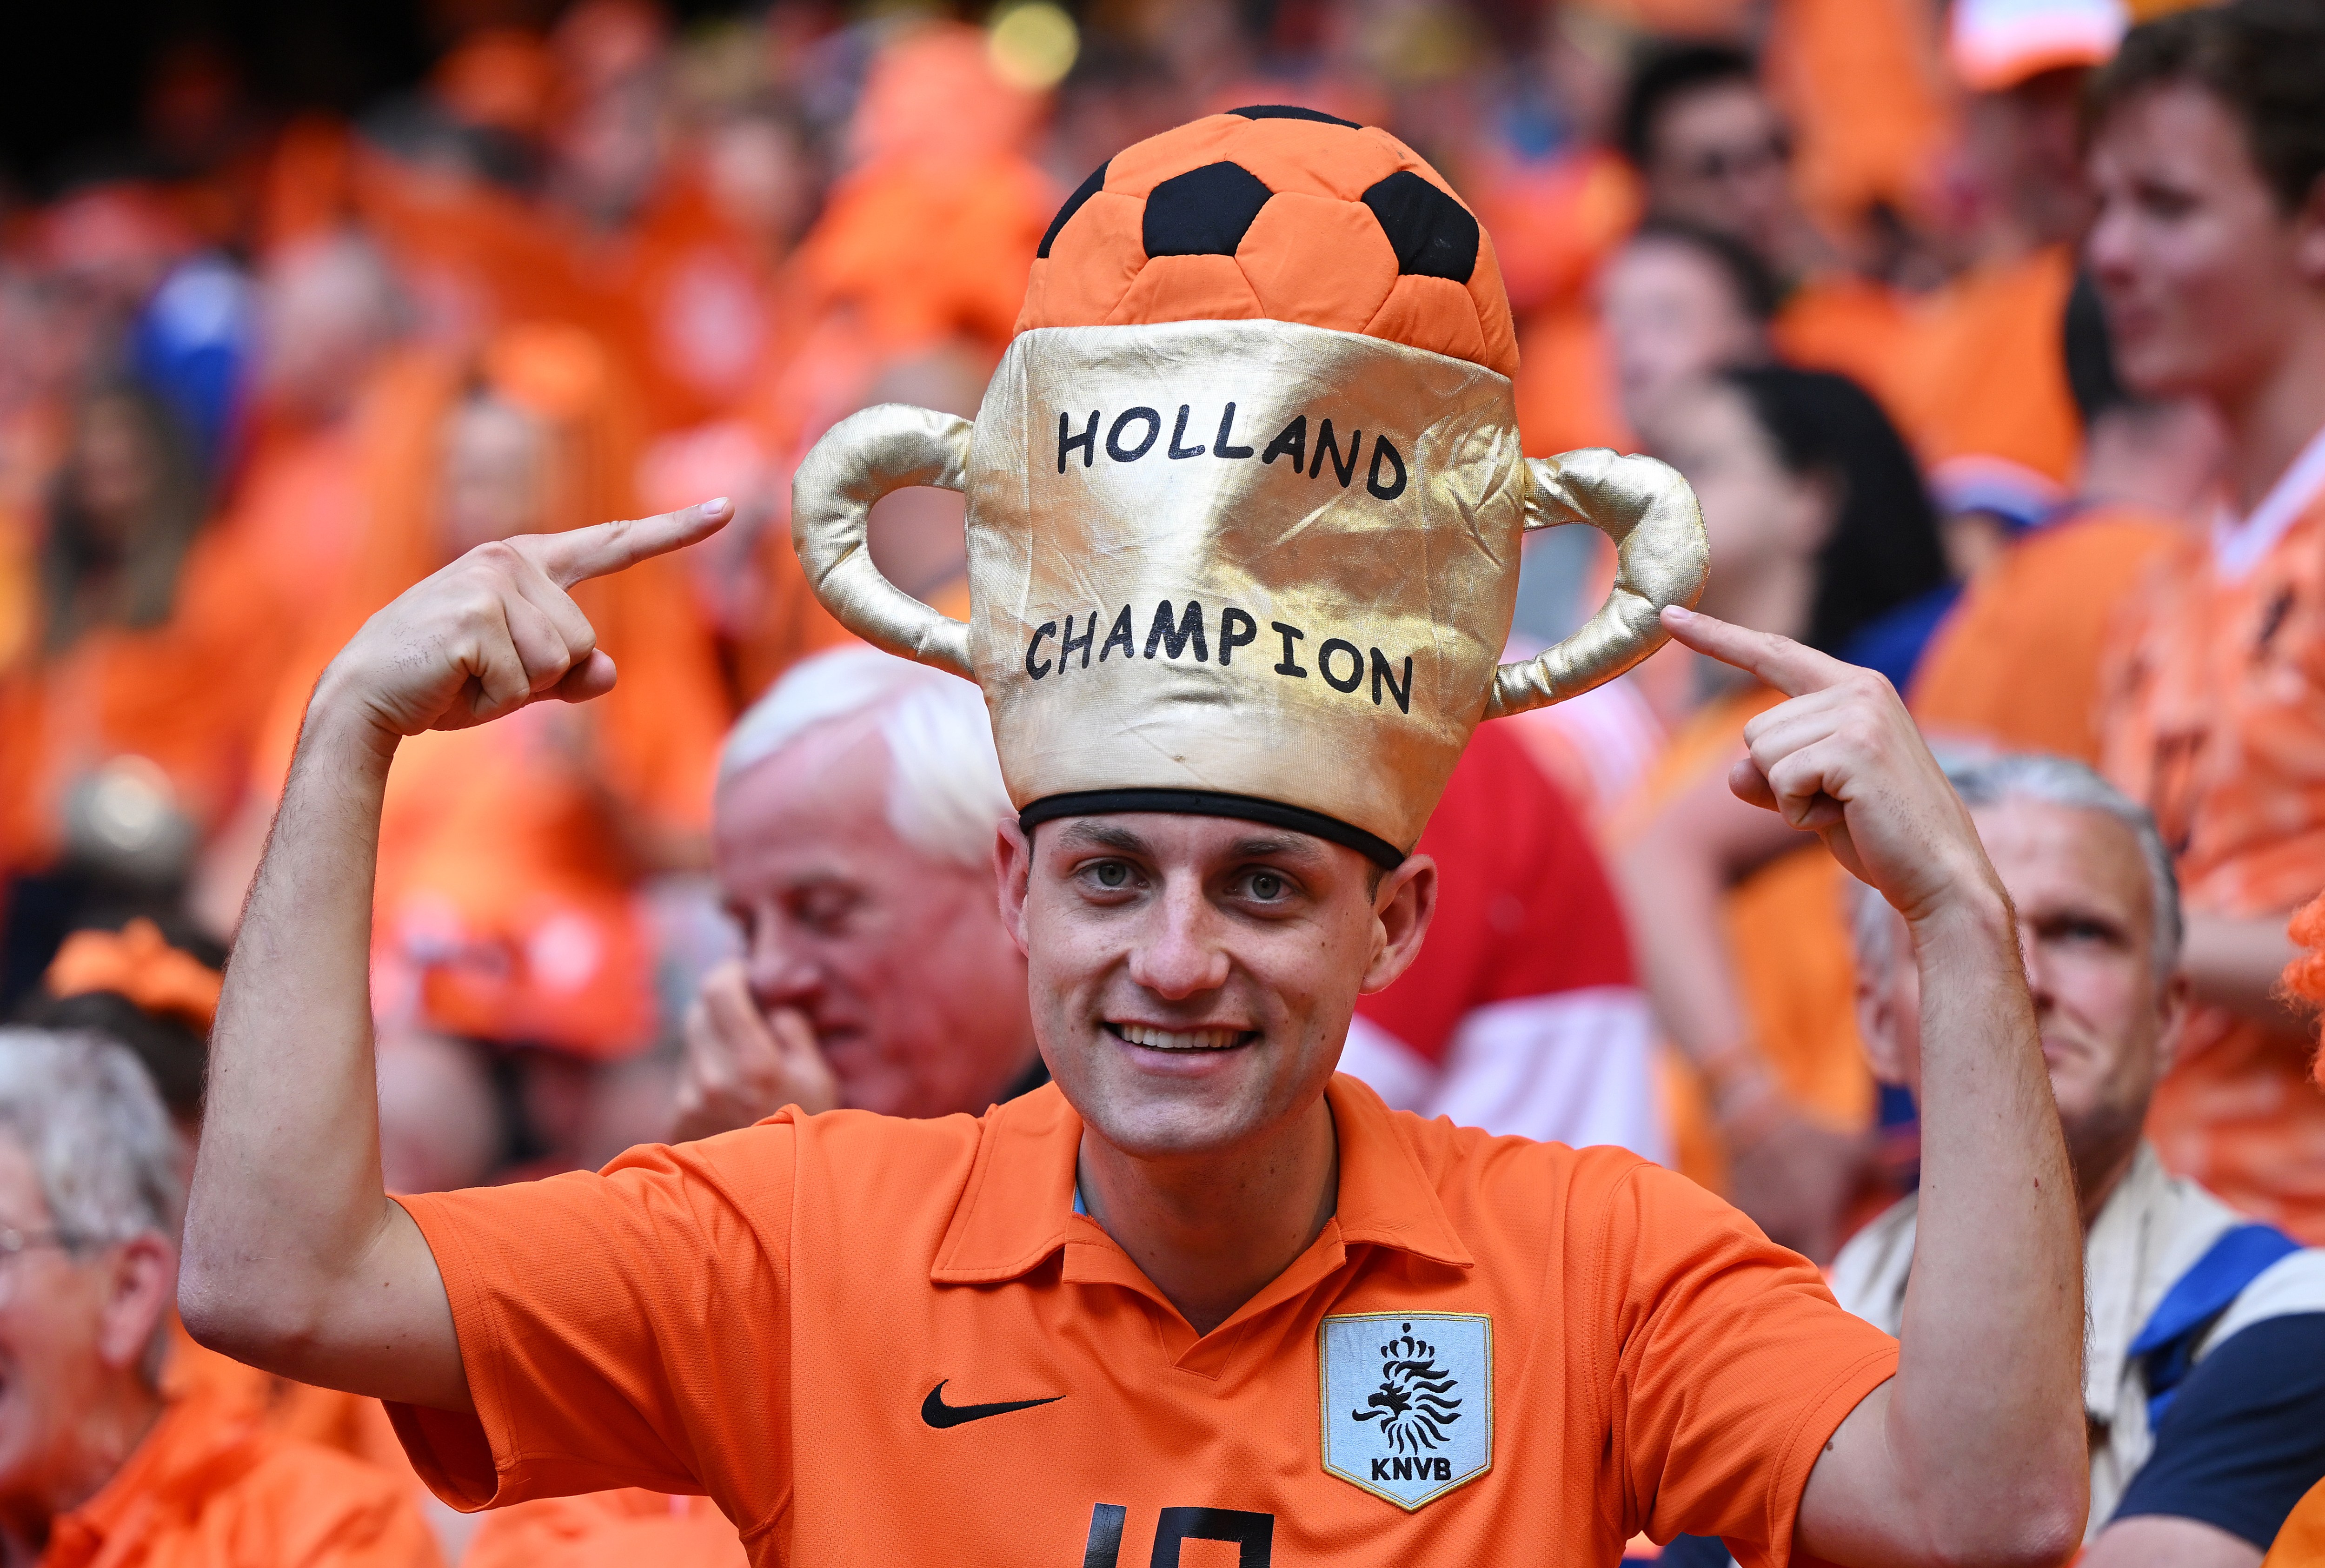 A Holland fan appears confident in his team’s chances in Germany